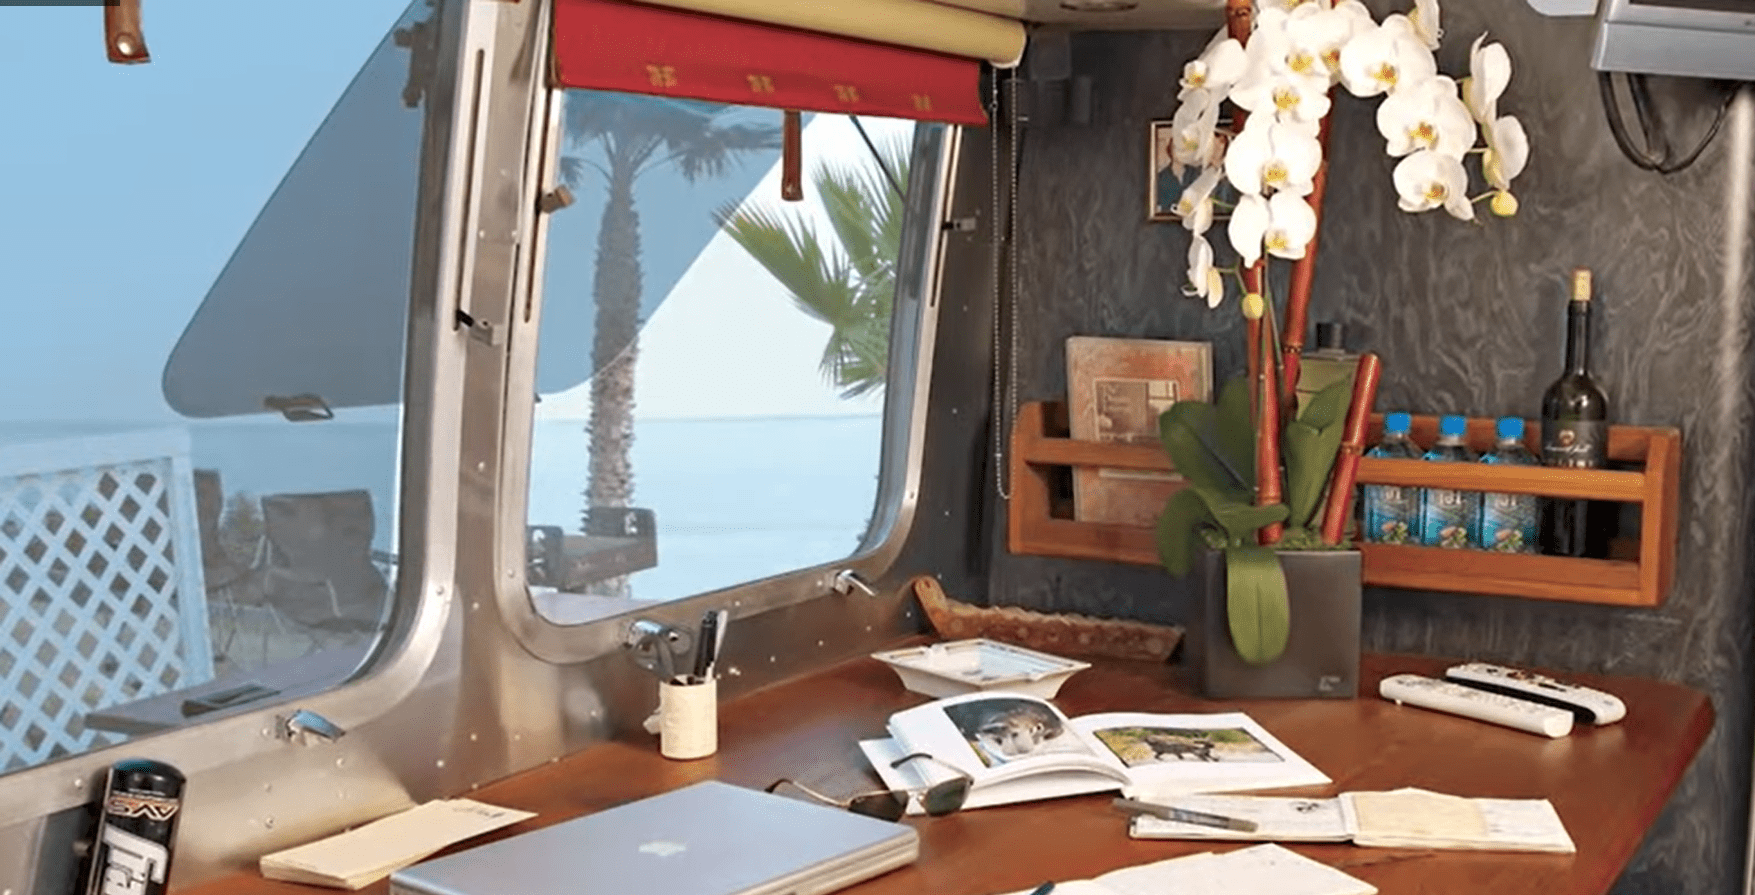 A desk and windows inside the Airstream trailer | Source: YouTube/Famous Entertainment